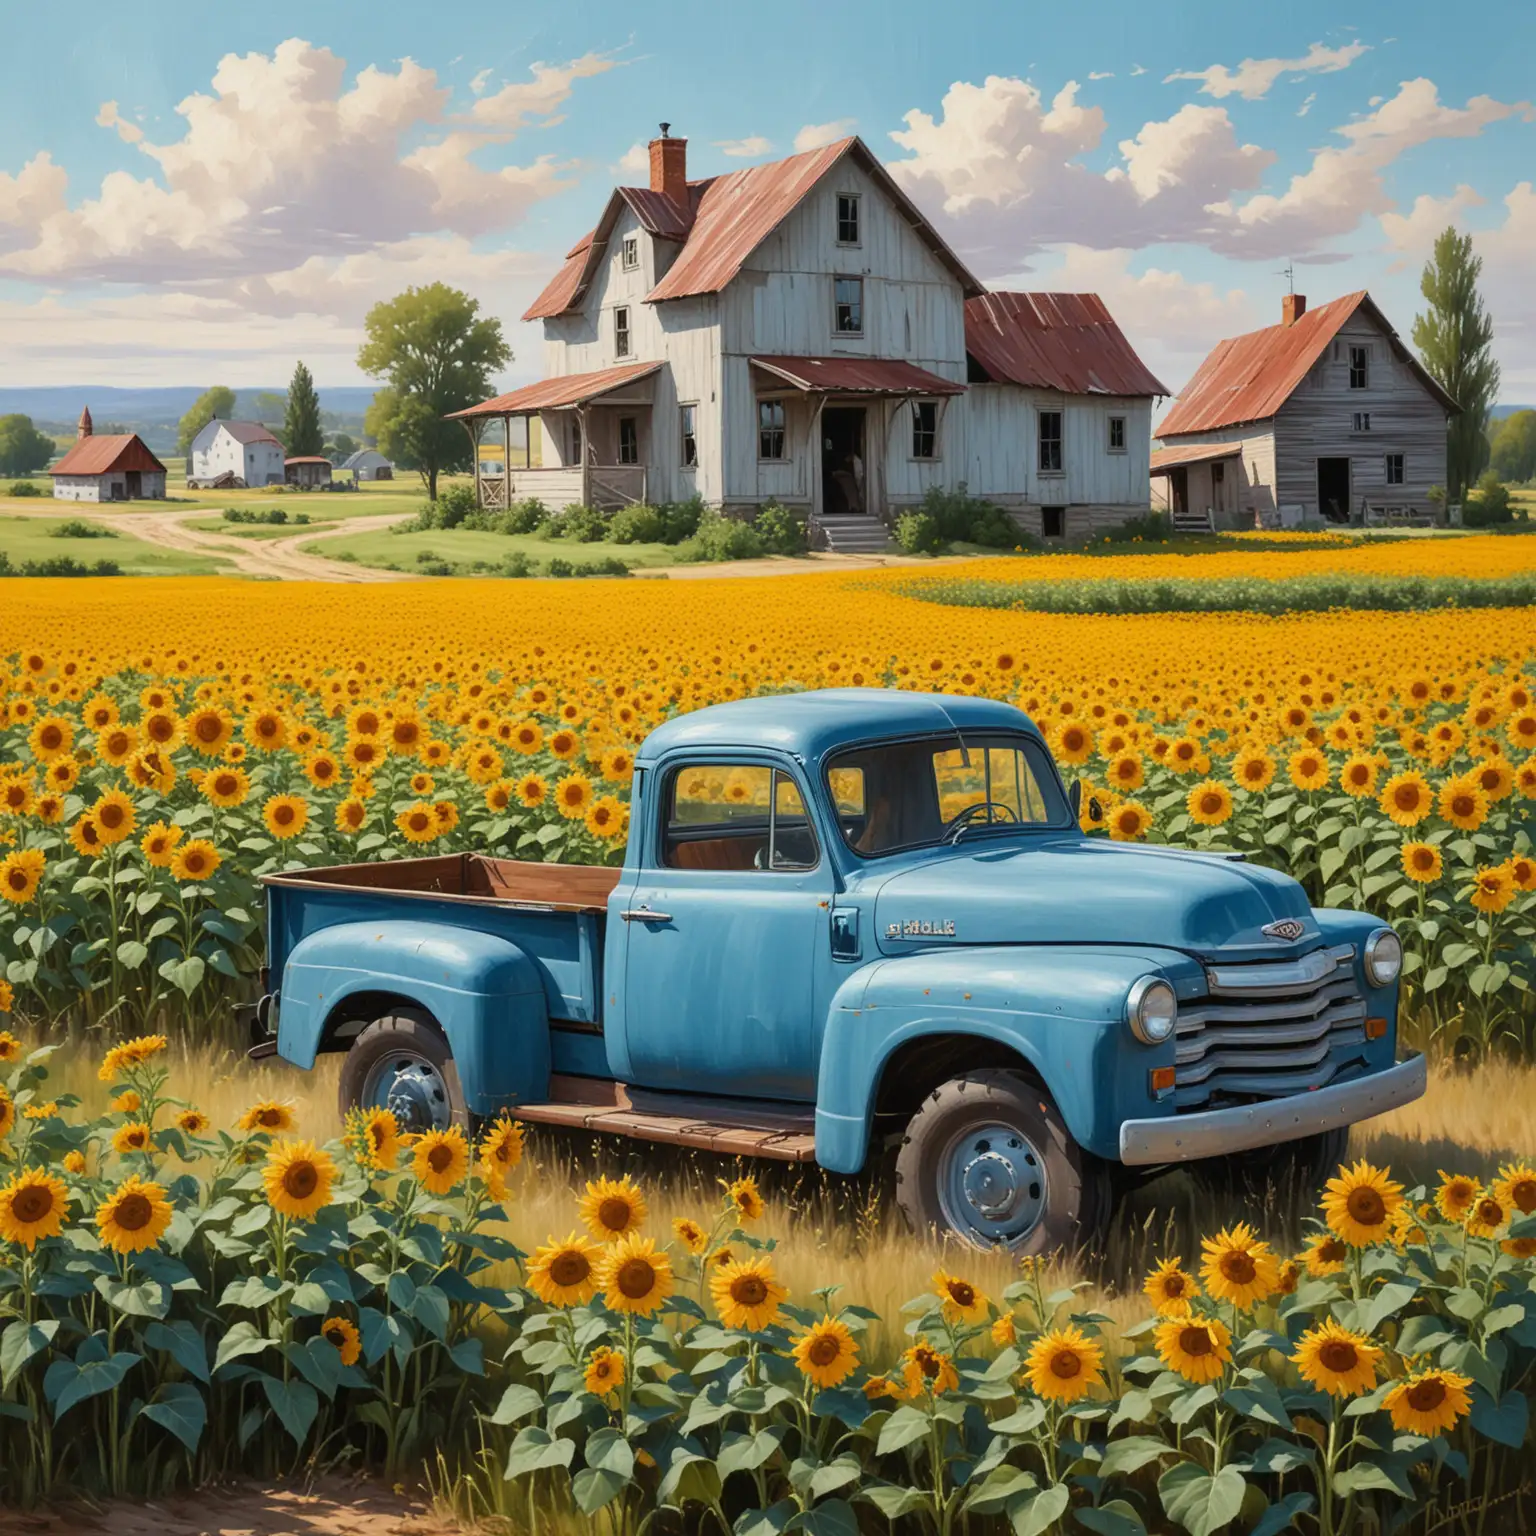 Oil painting with an old blue truck in a field of sunflowers in the foreground, and a farmhouse in the background